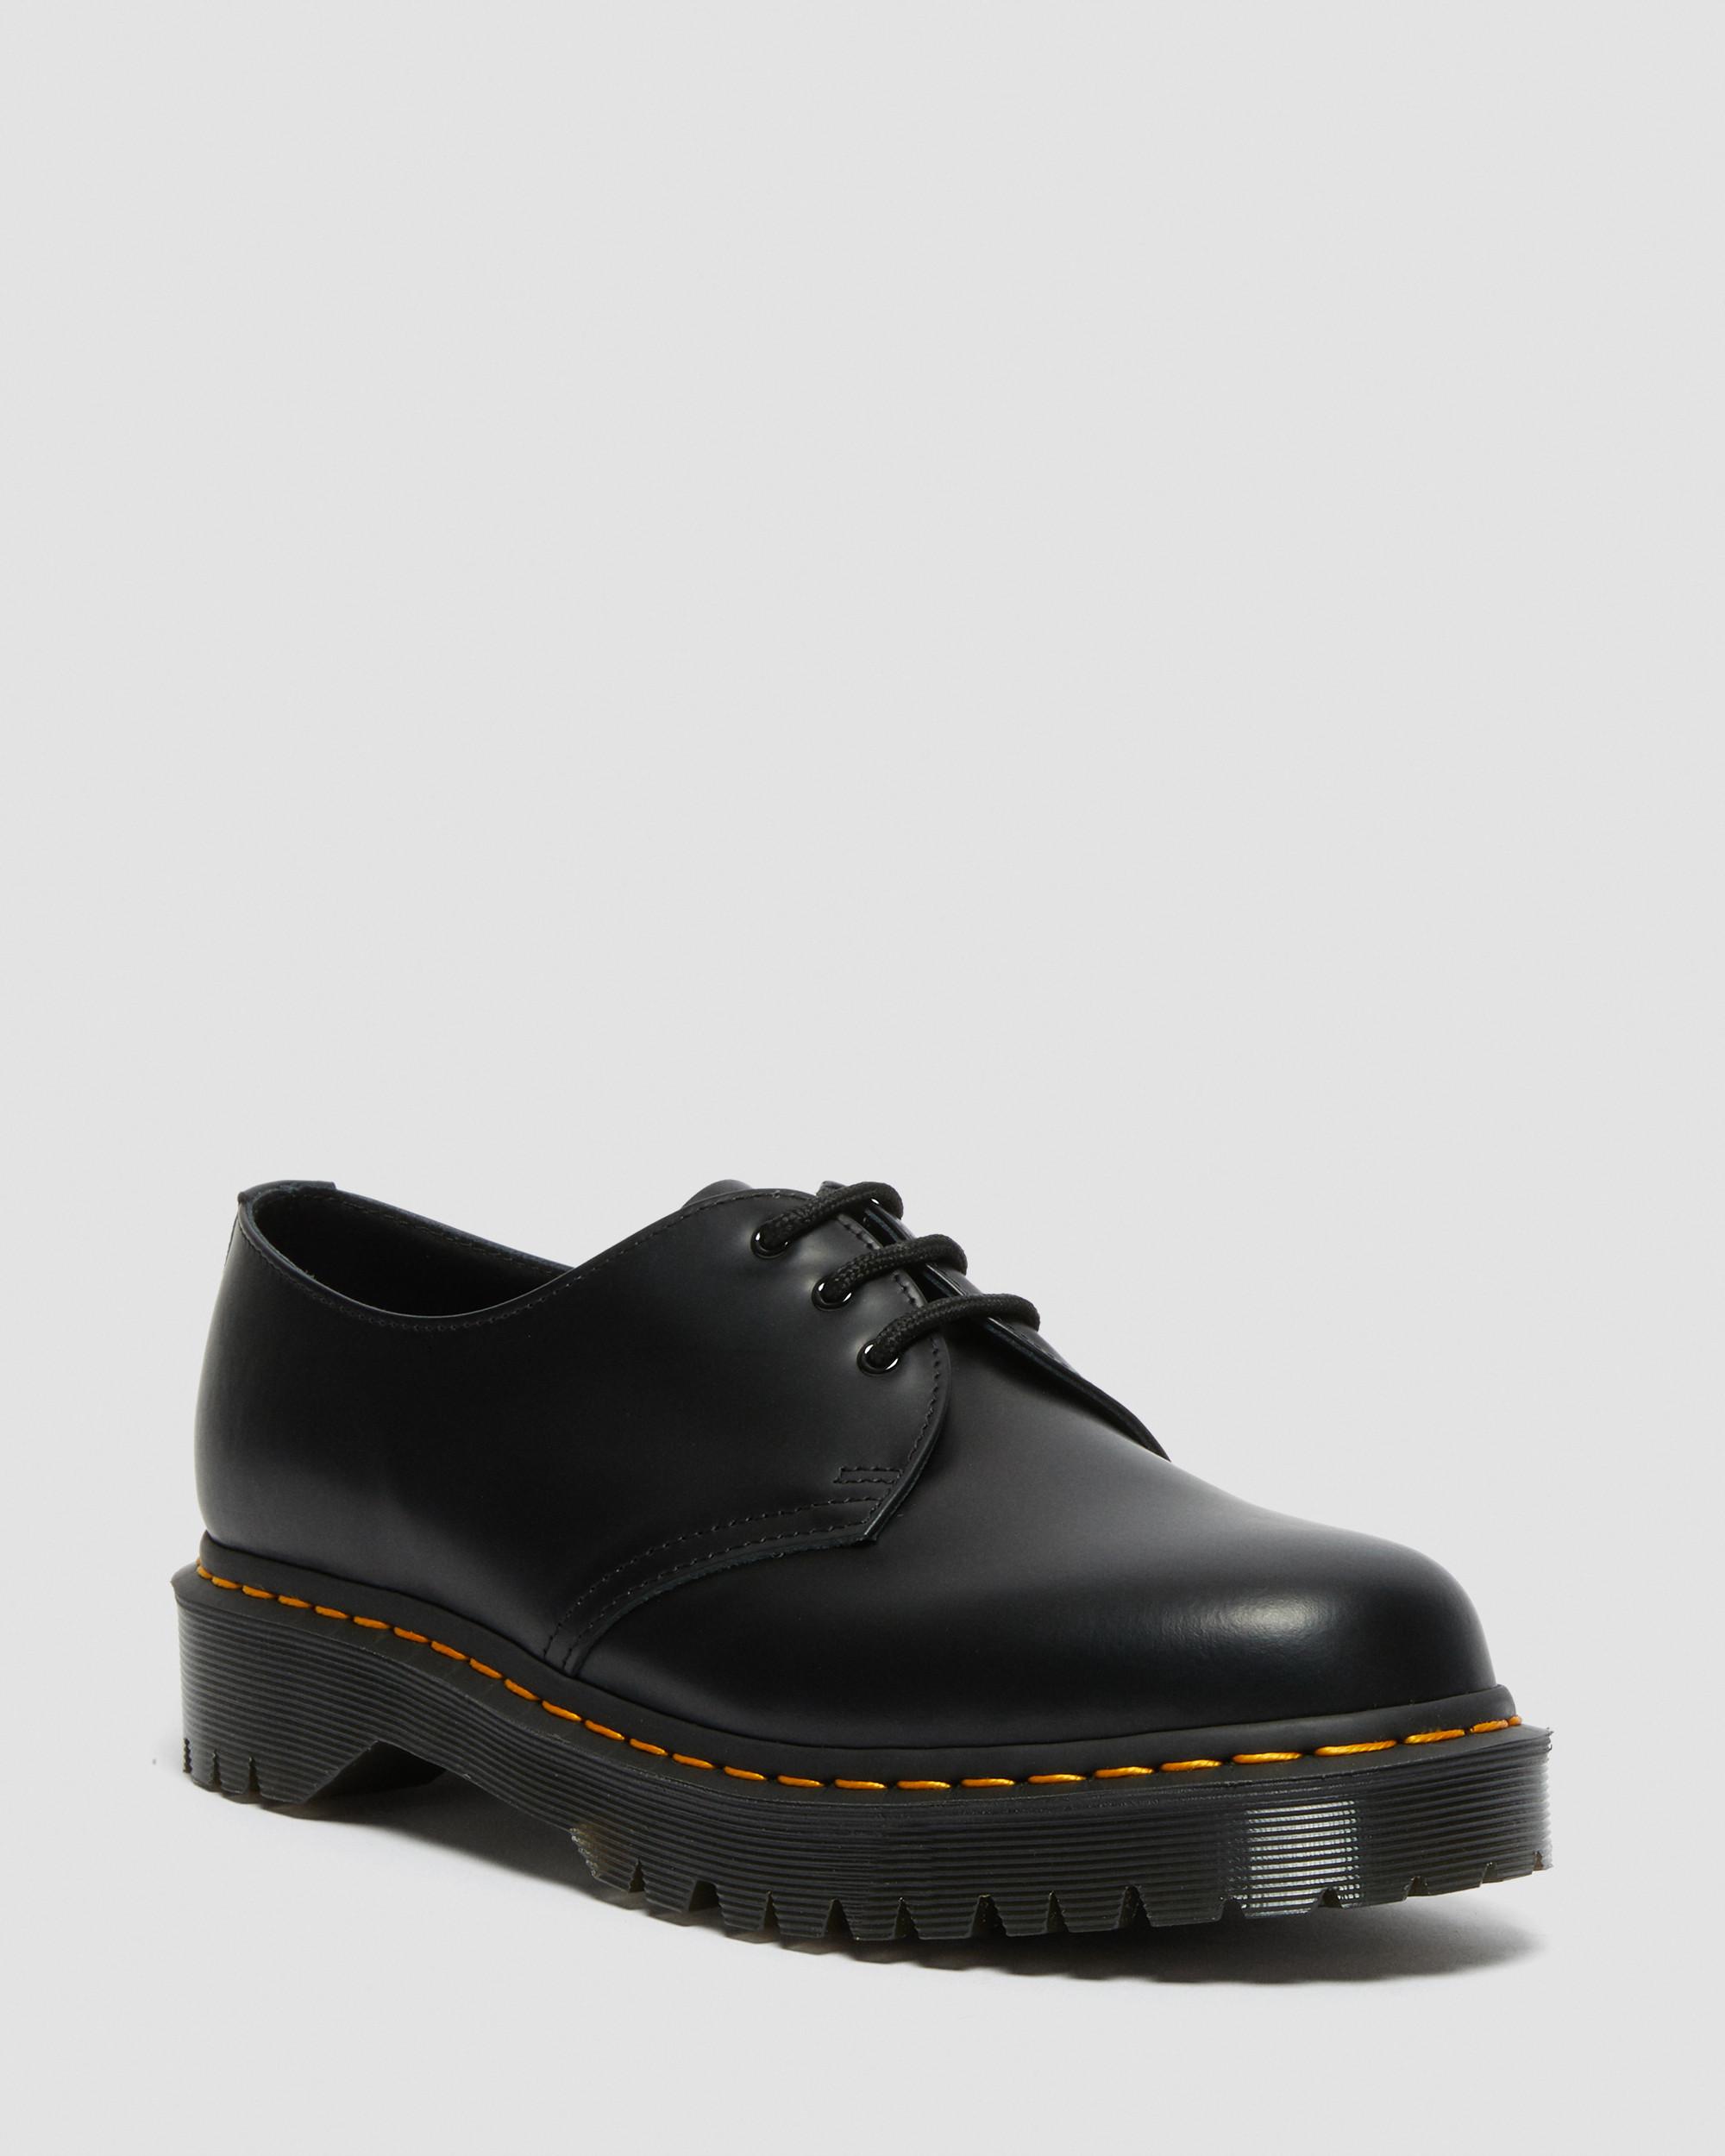 Dr Martens 1461 Bex Smooth Chaussures Mixte Adulte